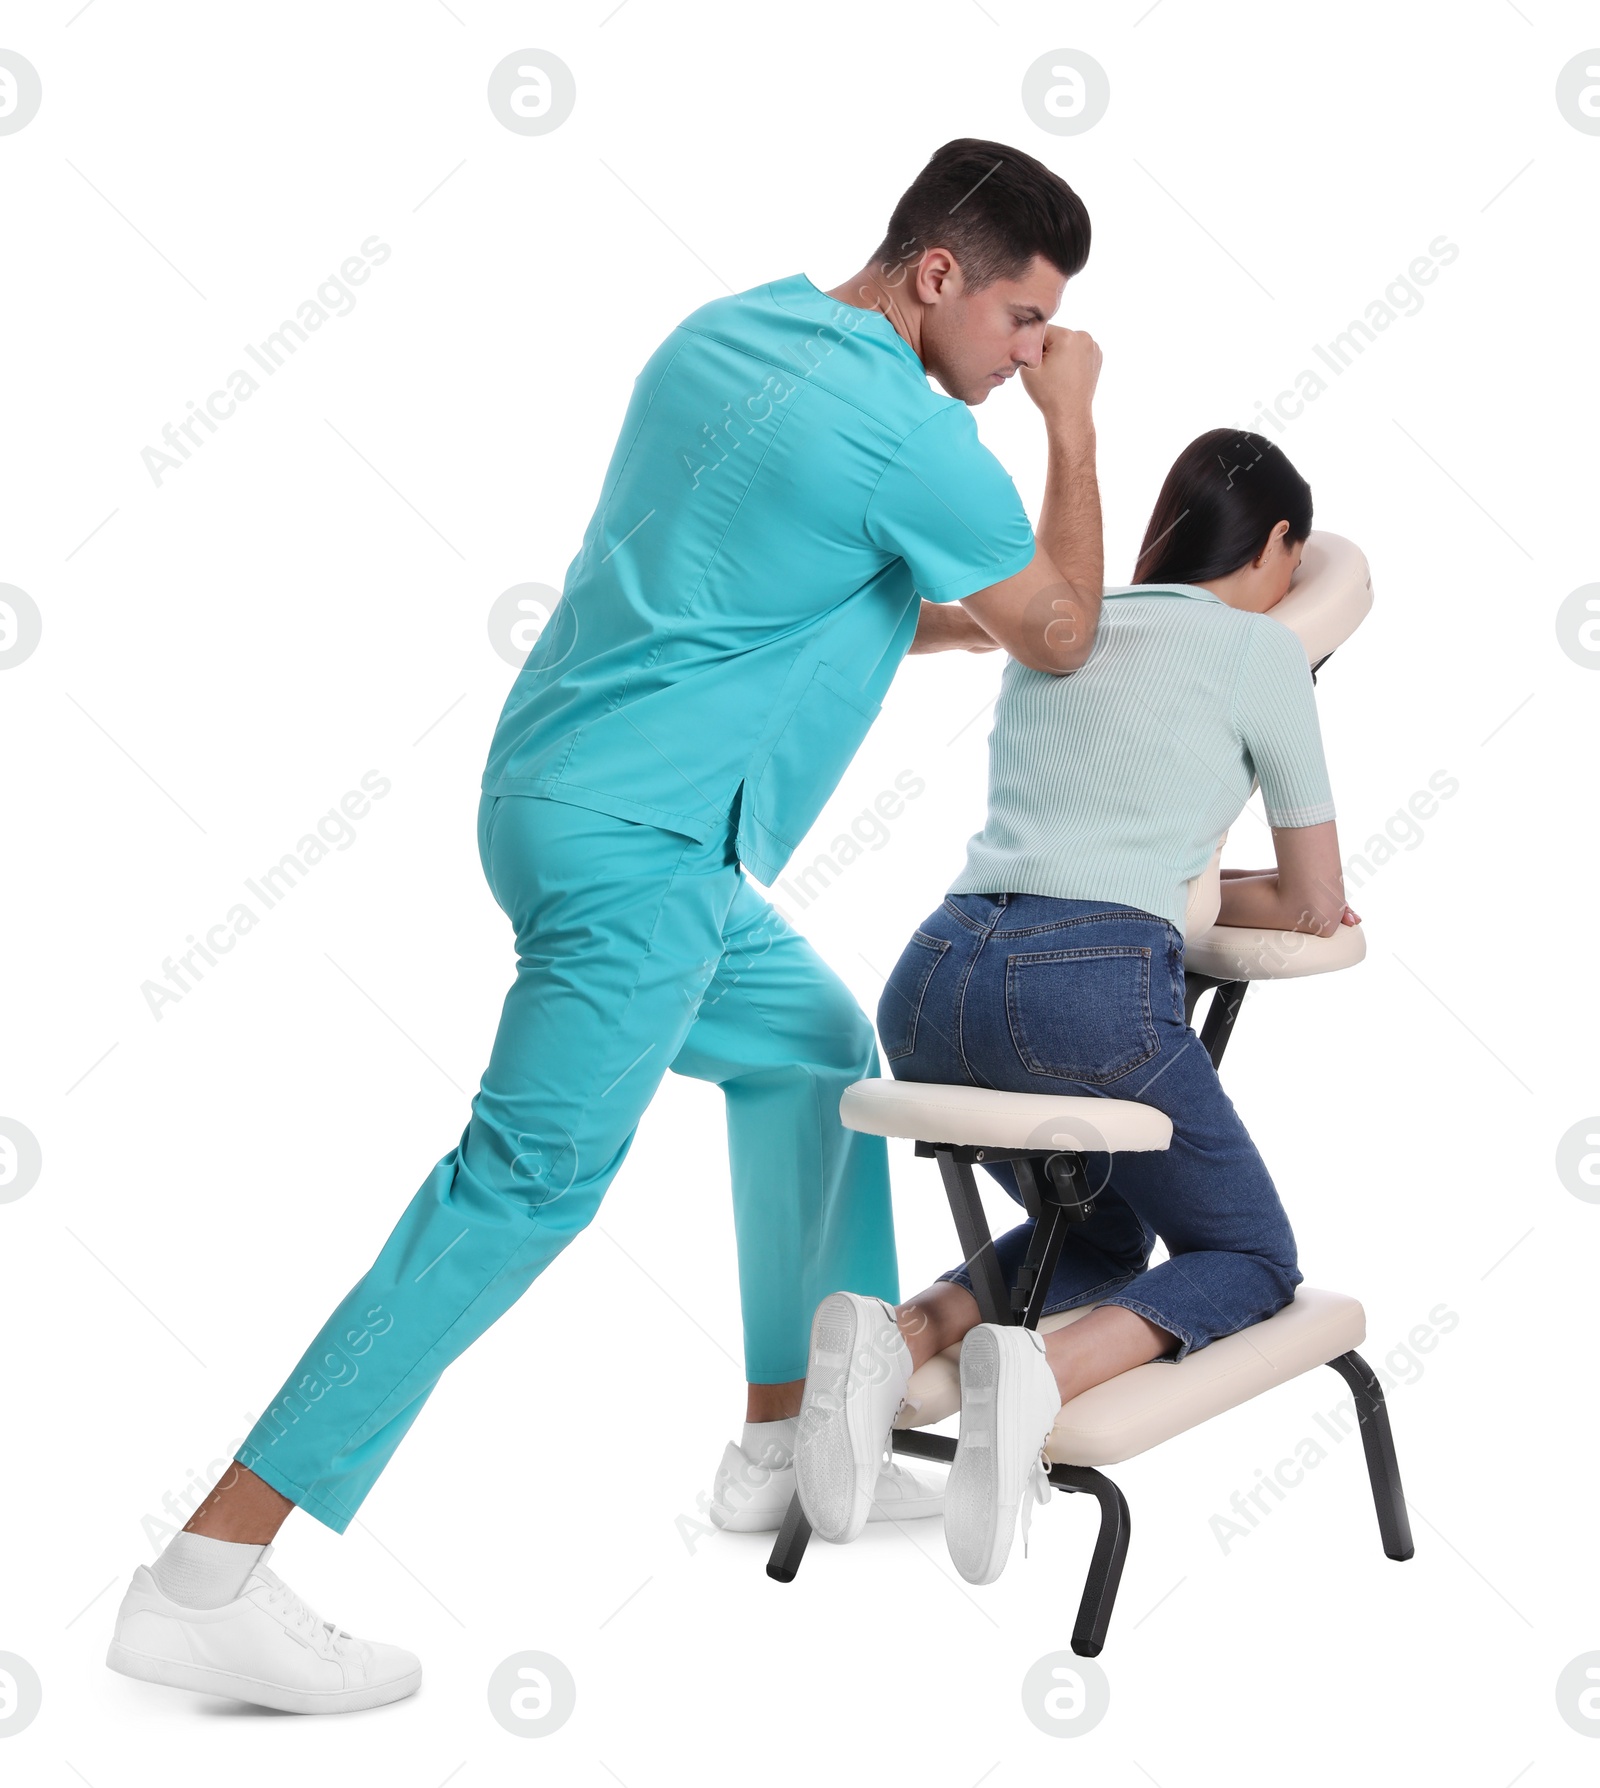 Photo of Woman receiving massage in modern chair on white background